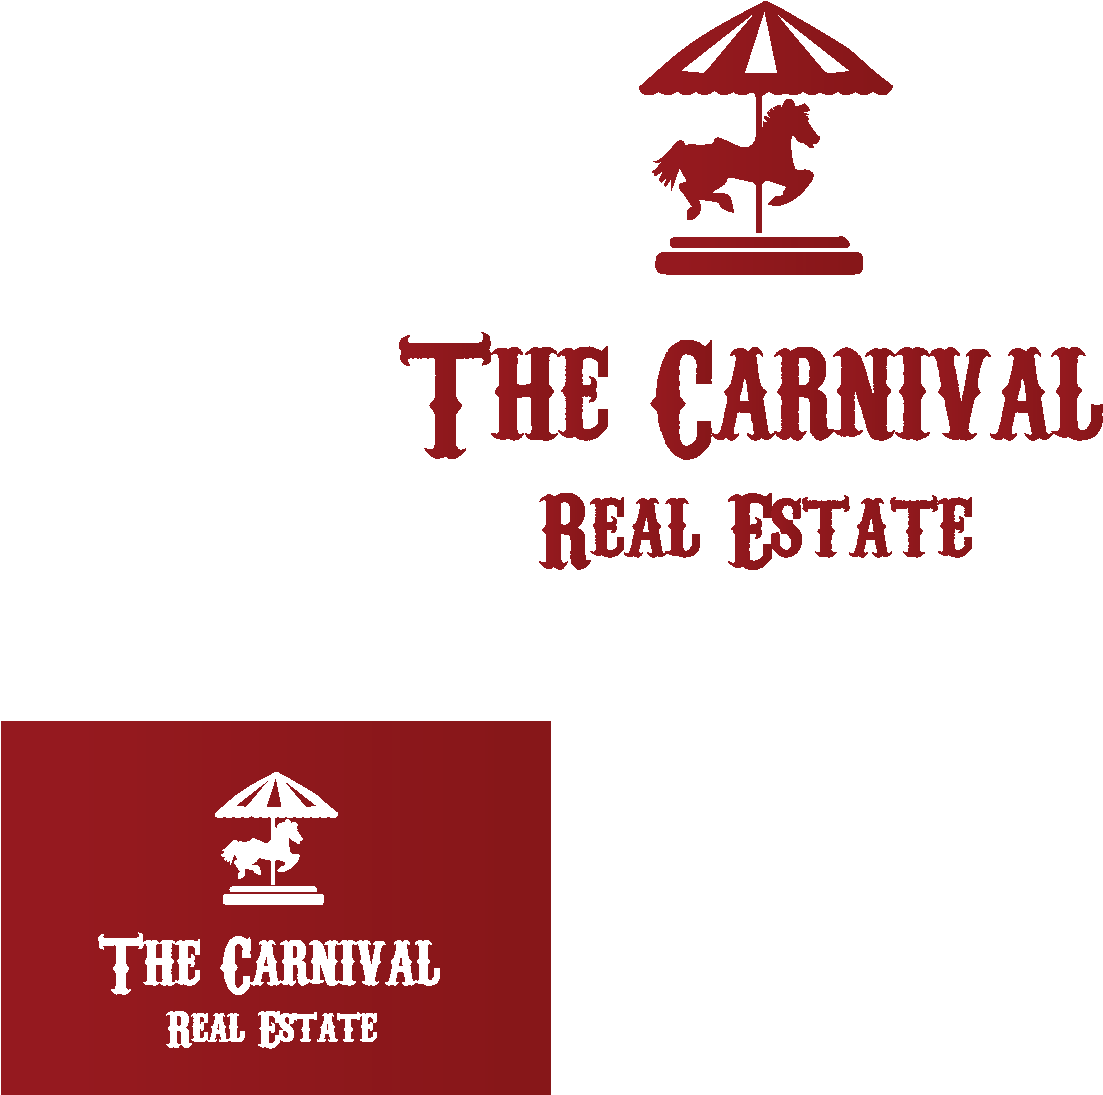 Logo Design By Nicolca37 For Carnival Real Estate - Fonts (1500x1250), Png Download